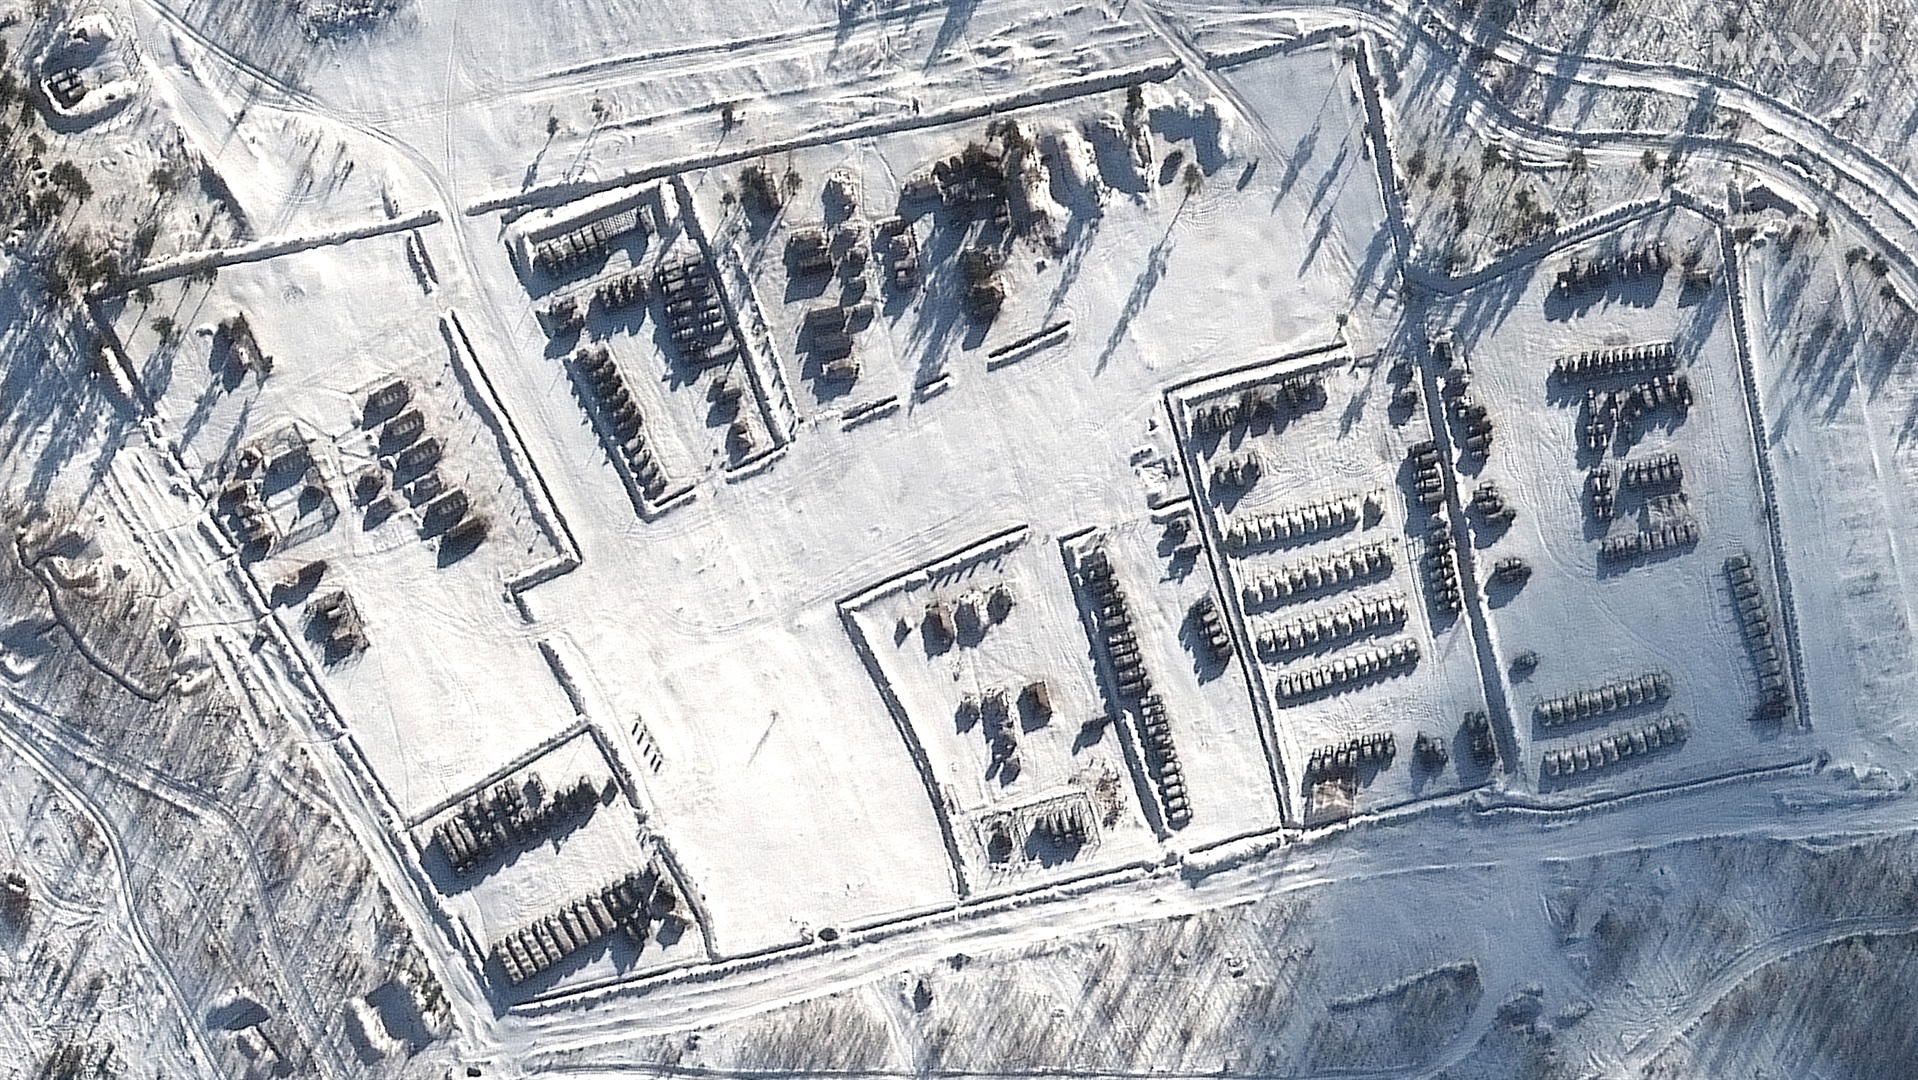 View of tanks, artillery, and tents at the Pogonovo training area, about 100 miles from the Ukrainian border, on Jan. 19, 2022. Satellite image ©2022 Maxar Technologies